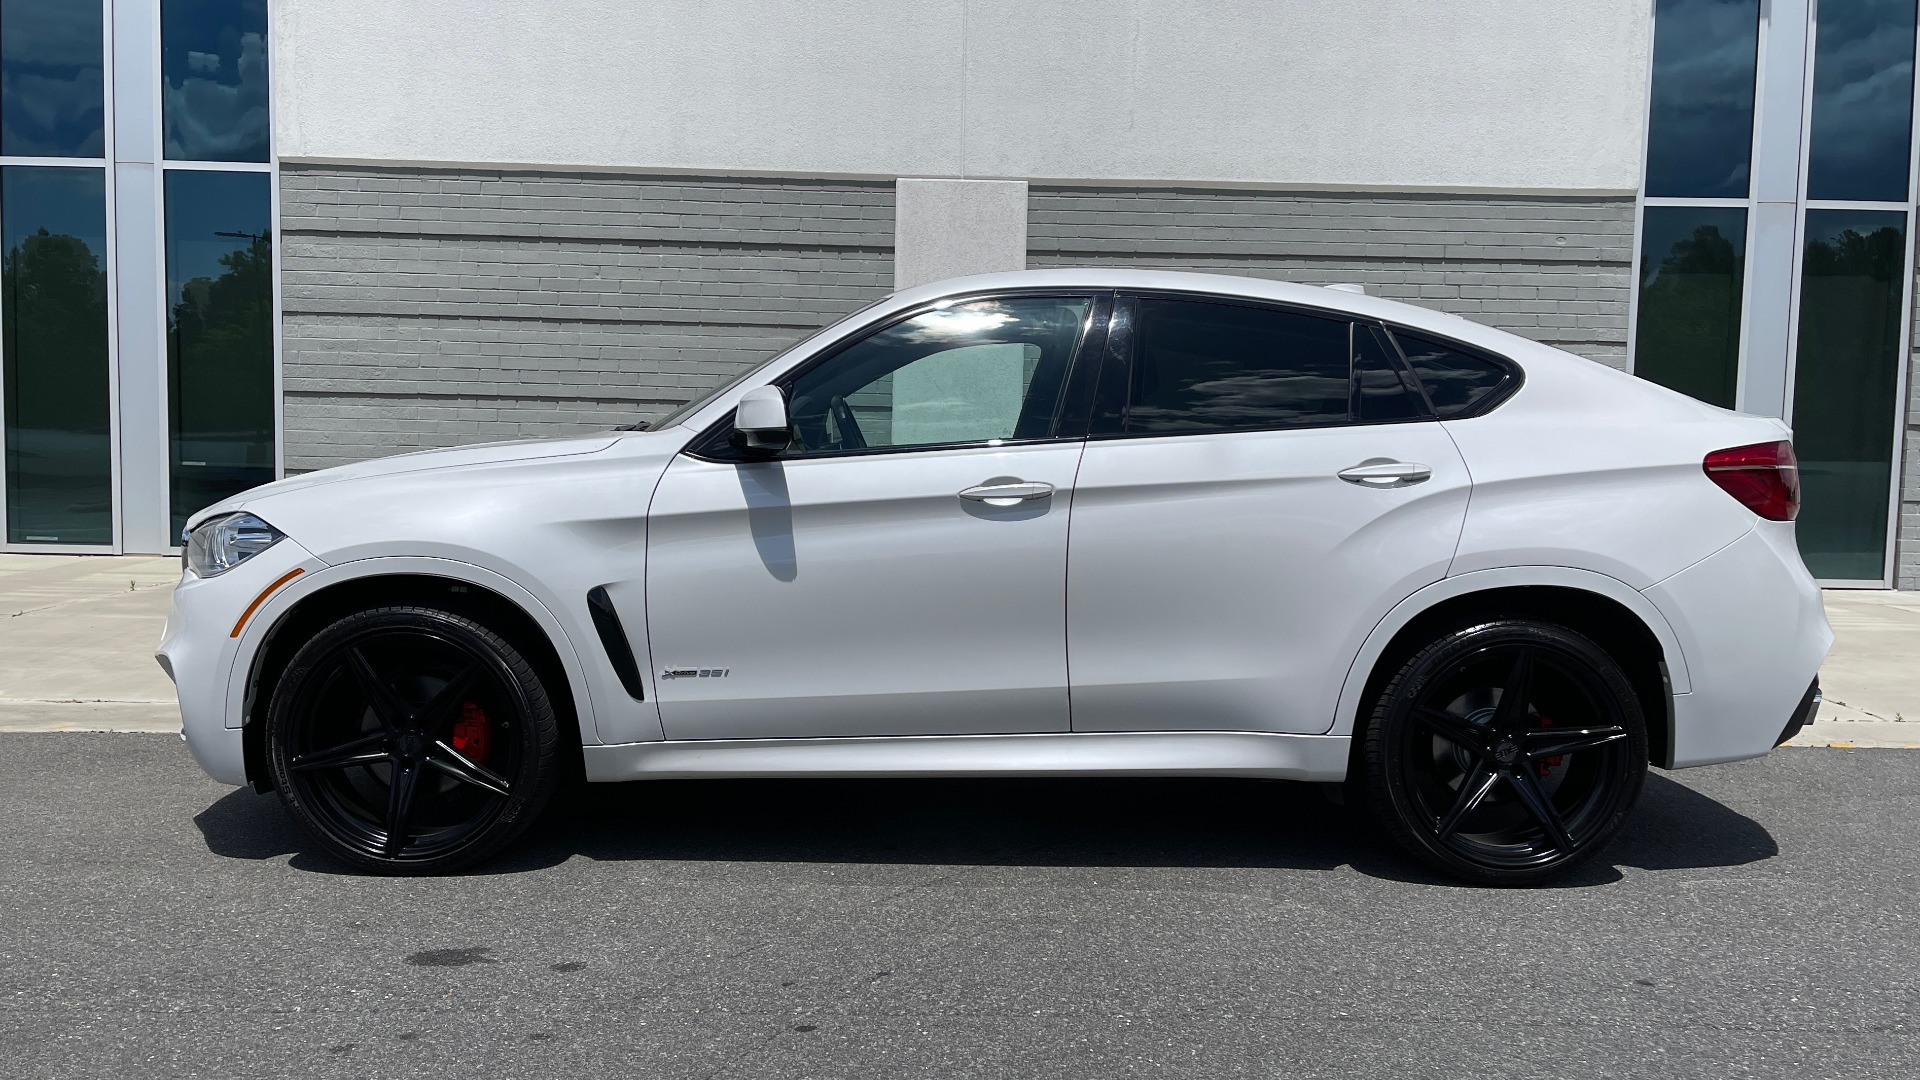 Used 2018 BMW X6 XDRIVE35I M-SPORT / NAV / DRVR ASST PLUS / ADAPT M-SUSP / REARVIEW for sale Sold at Formula Imports in Charlotte NC 28227 5